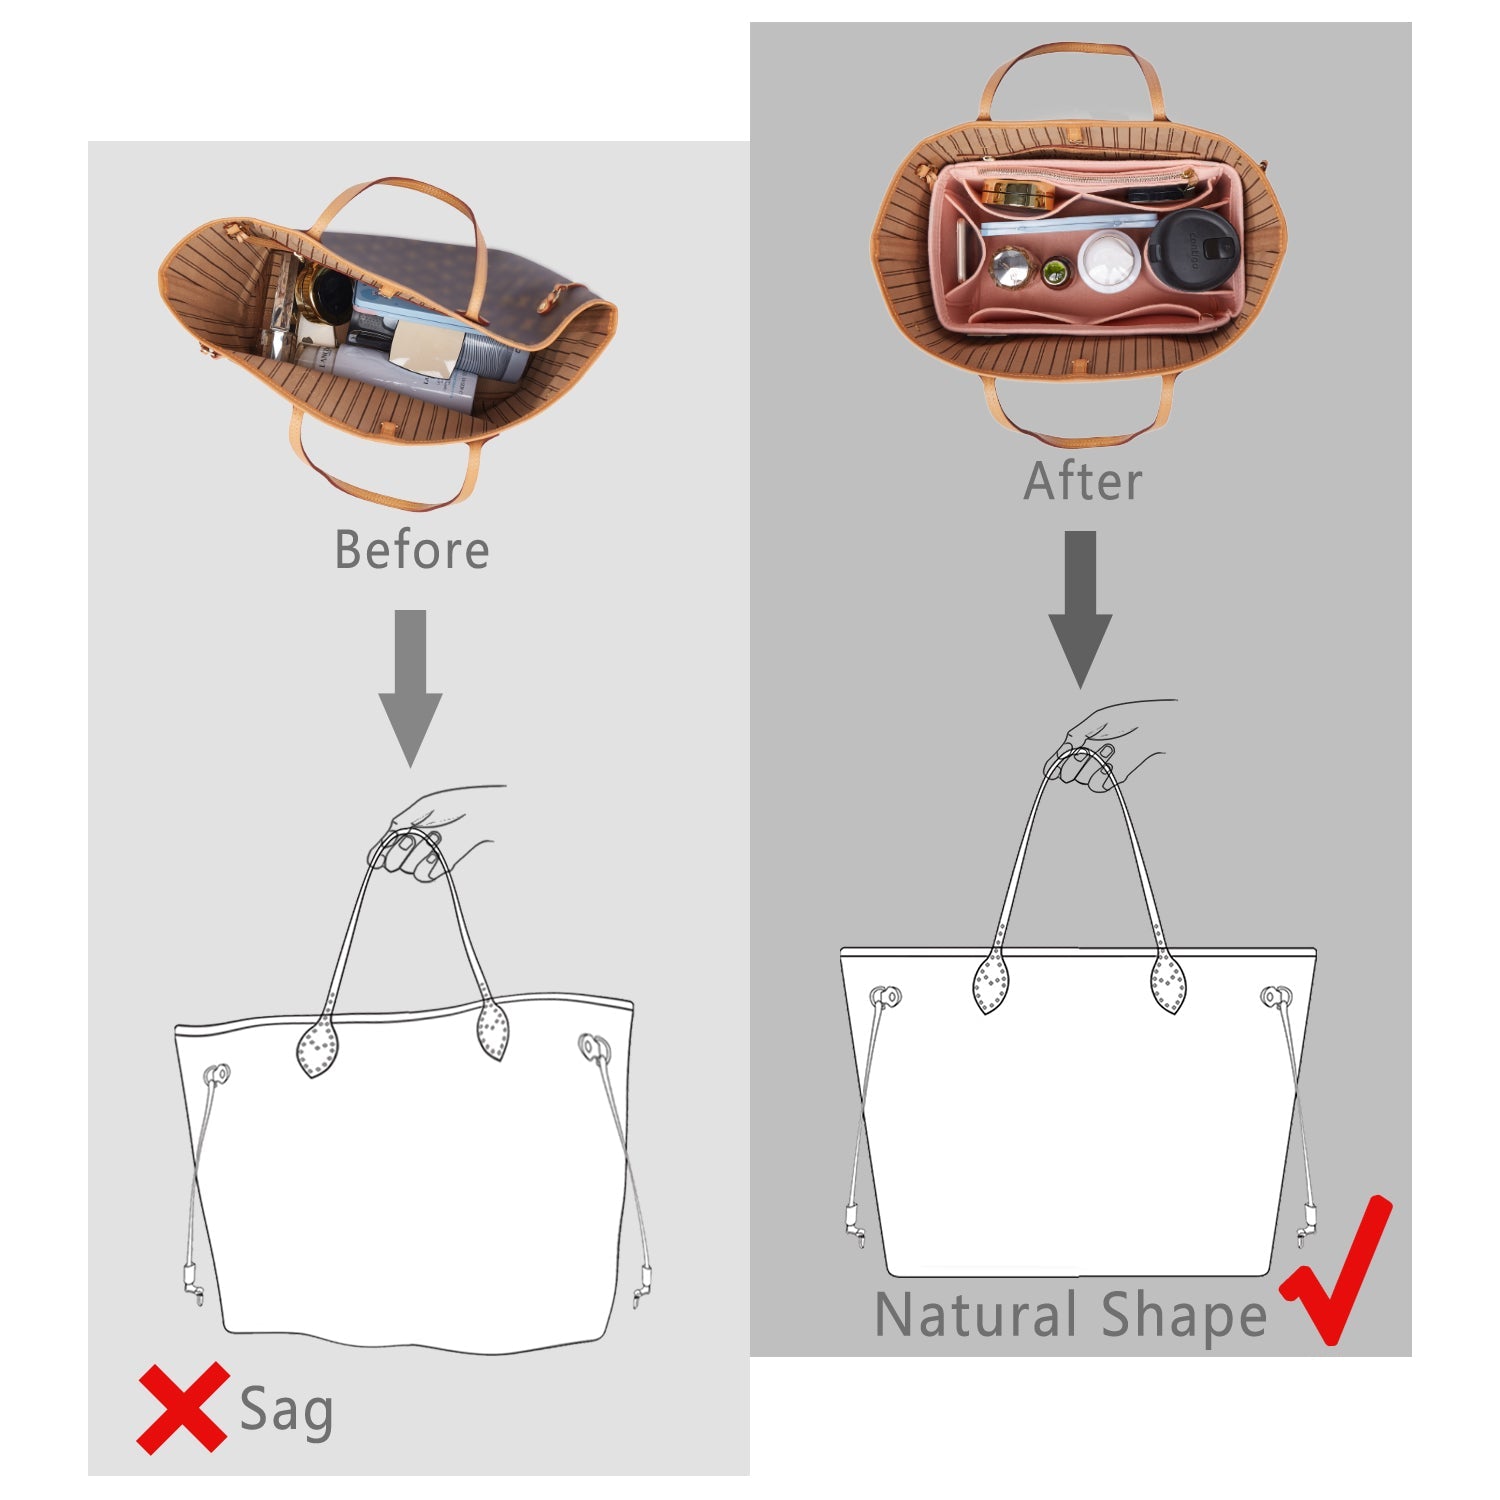 Material Purse Organizer Bag Insert with Bottle Holder - Ideal for Speedy, Neverfull, Tote, ONTHEGO, Artsy, and More Handbags. Keep Your Essentials Tidy and Accessible.